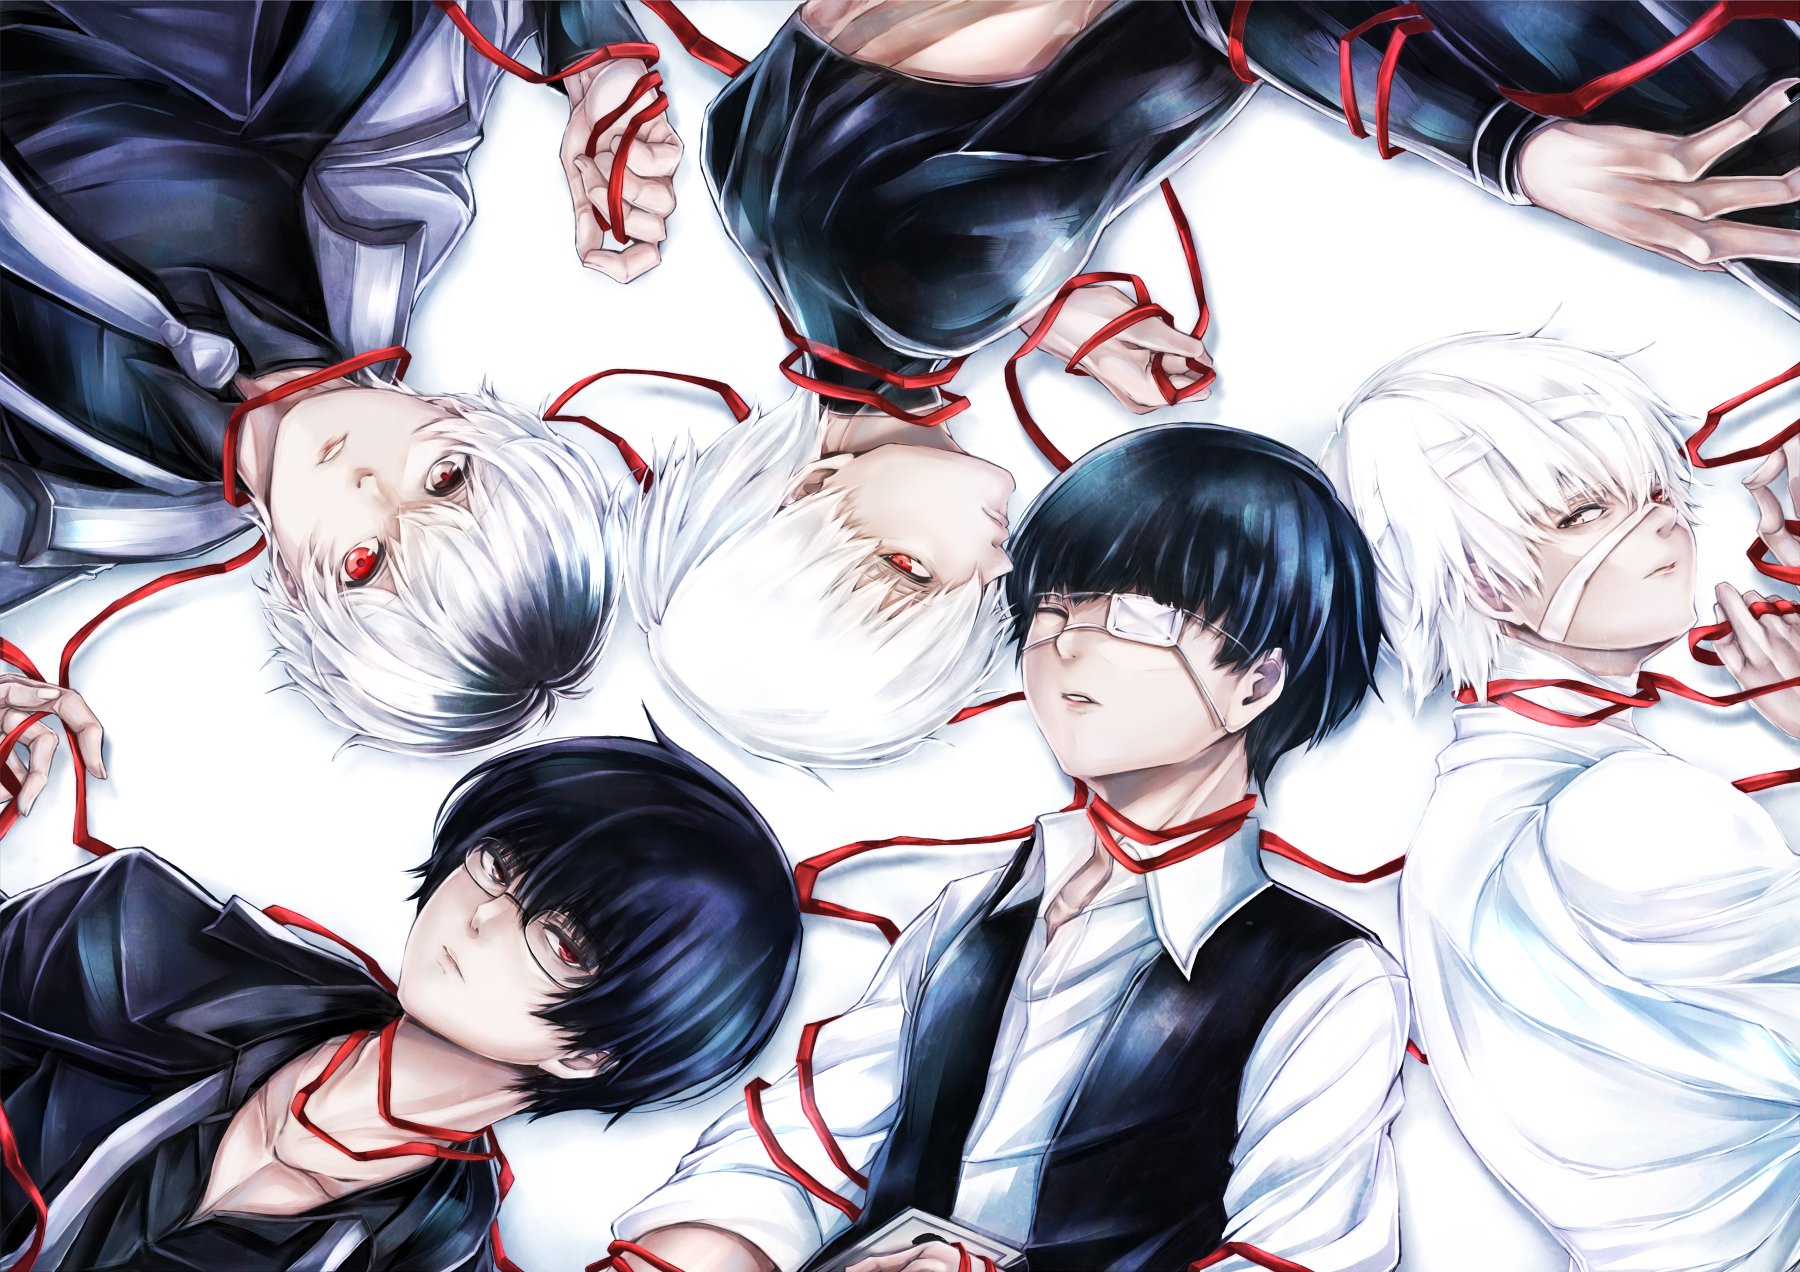 Tokyo Ghoul:re Wallpaper and Background Image | 1800x1272 ...